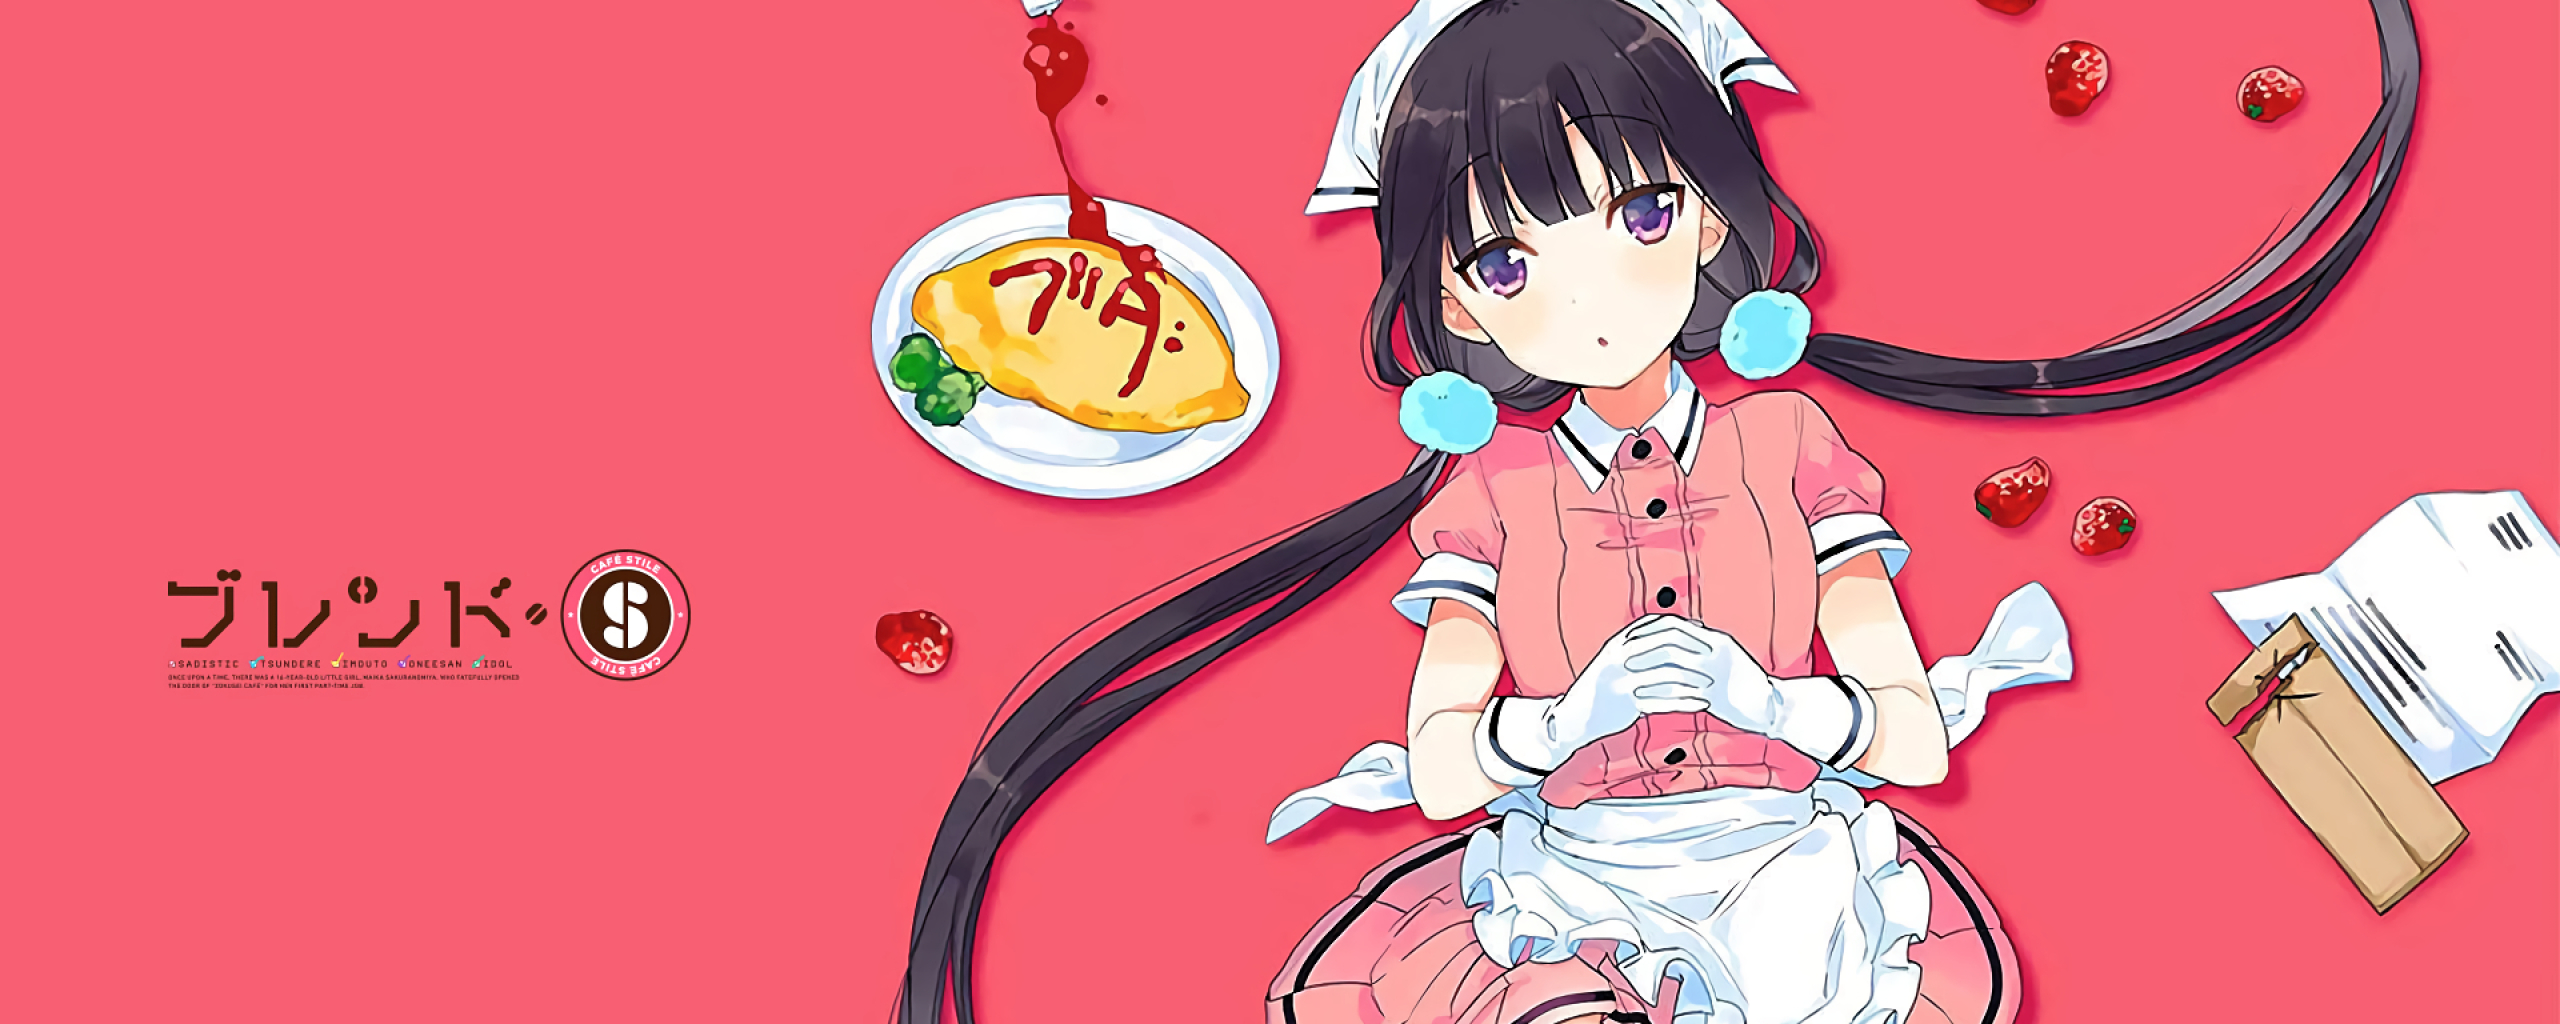 2560x1024 New Blend S Anime 2560x1024 Resolution Wallpaper Hd Anime 4k Wallpapers Images Photos And Background Wallpapers Den